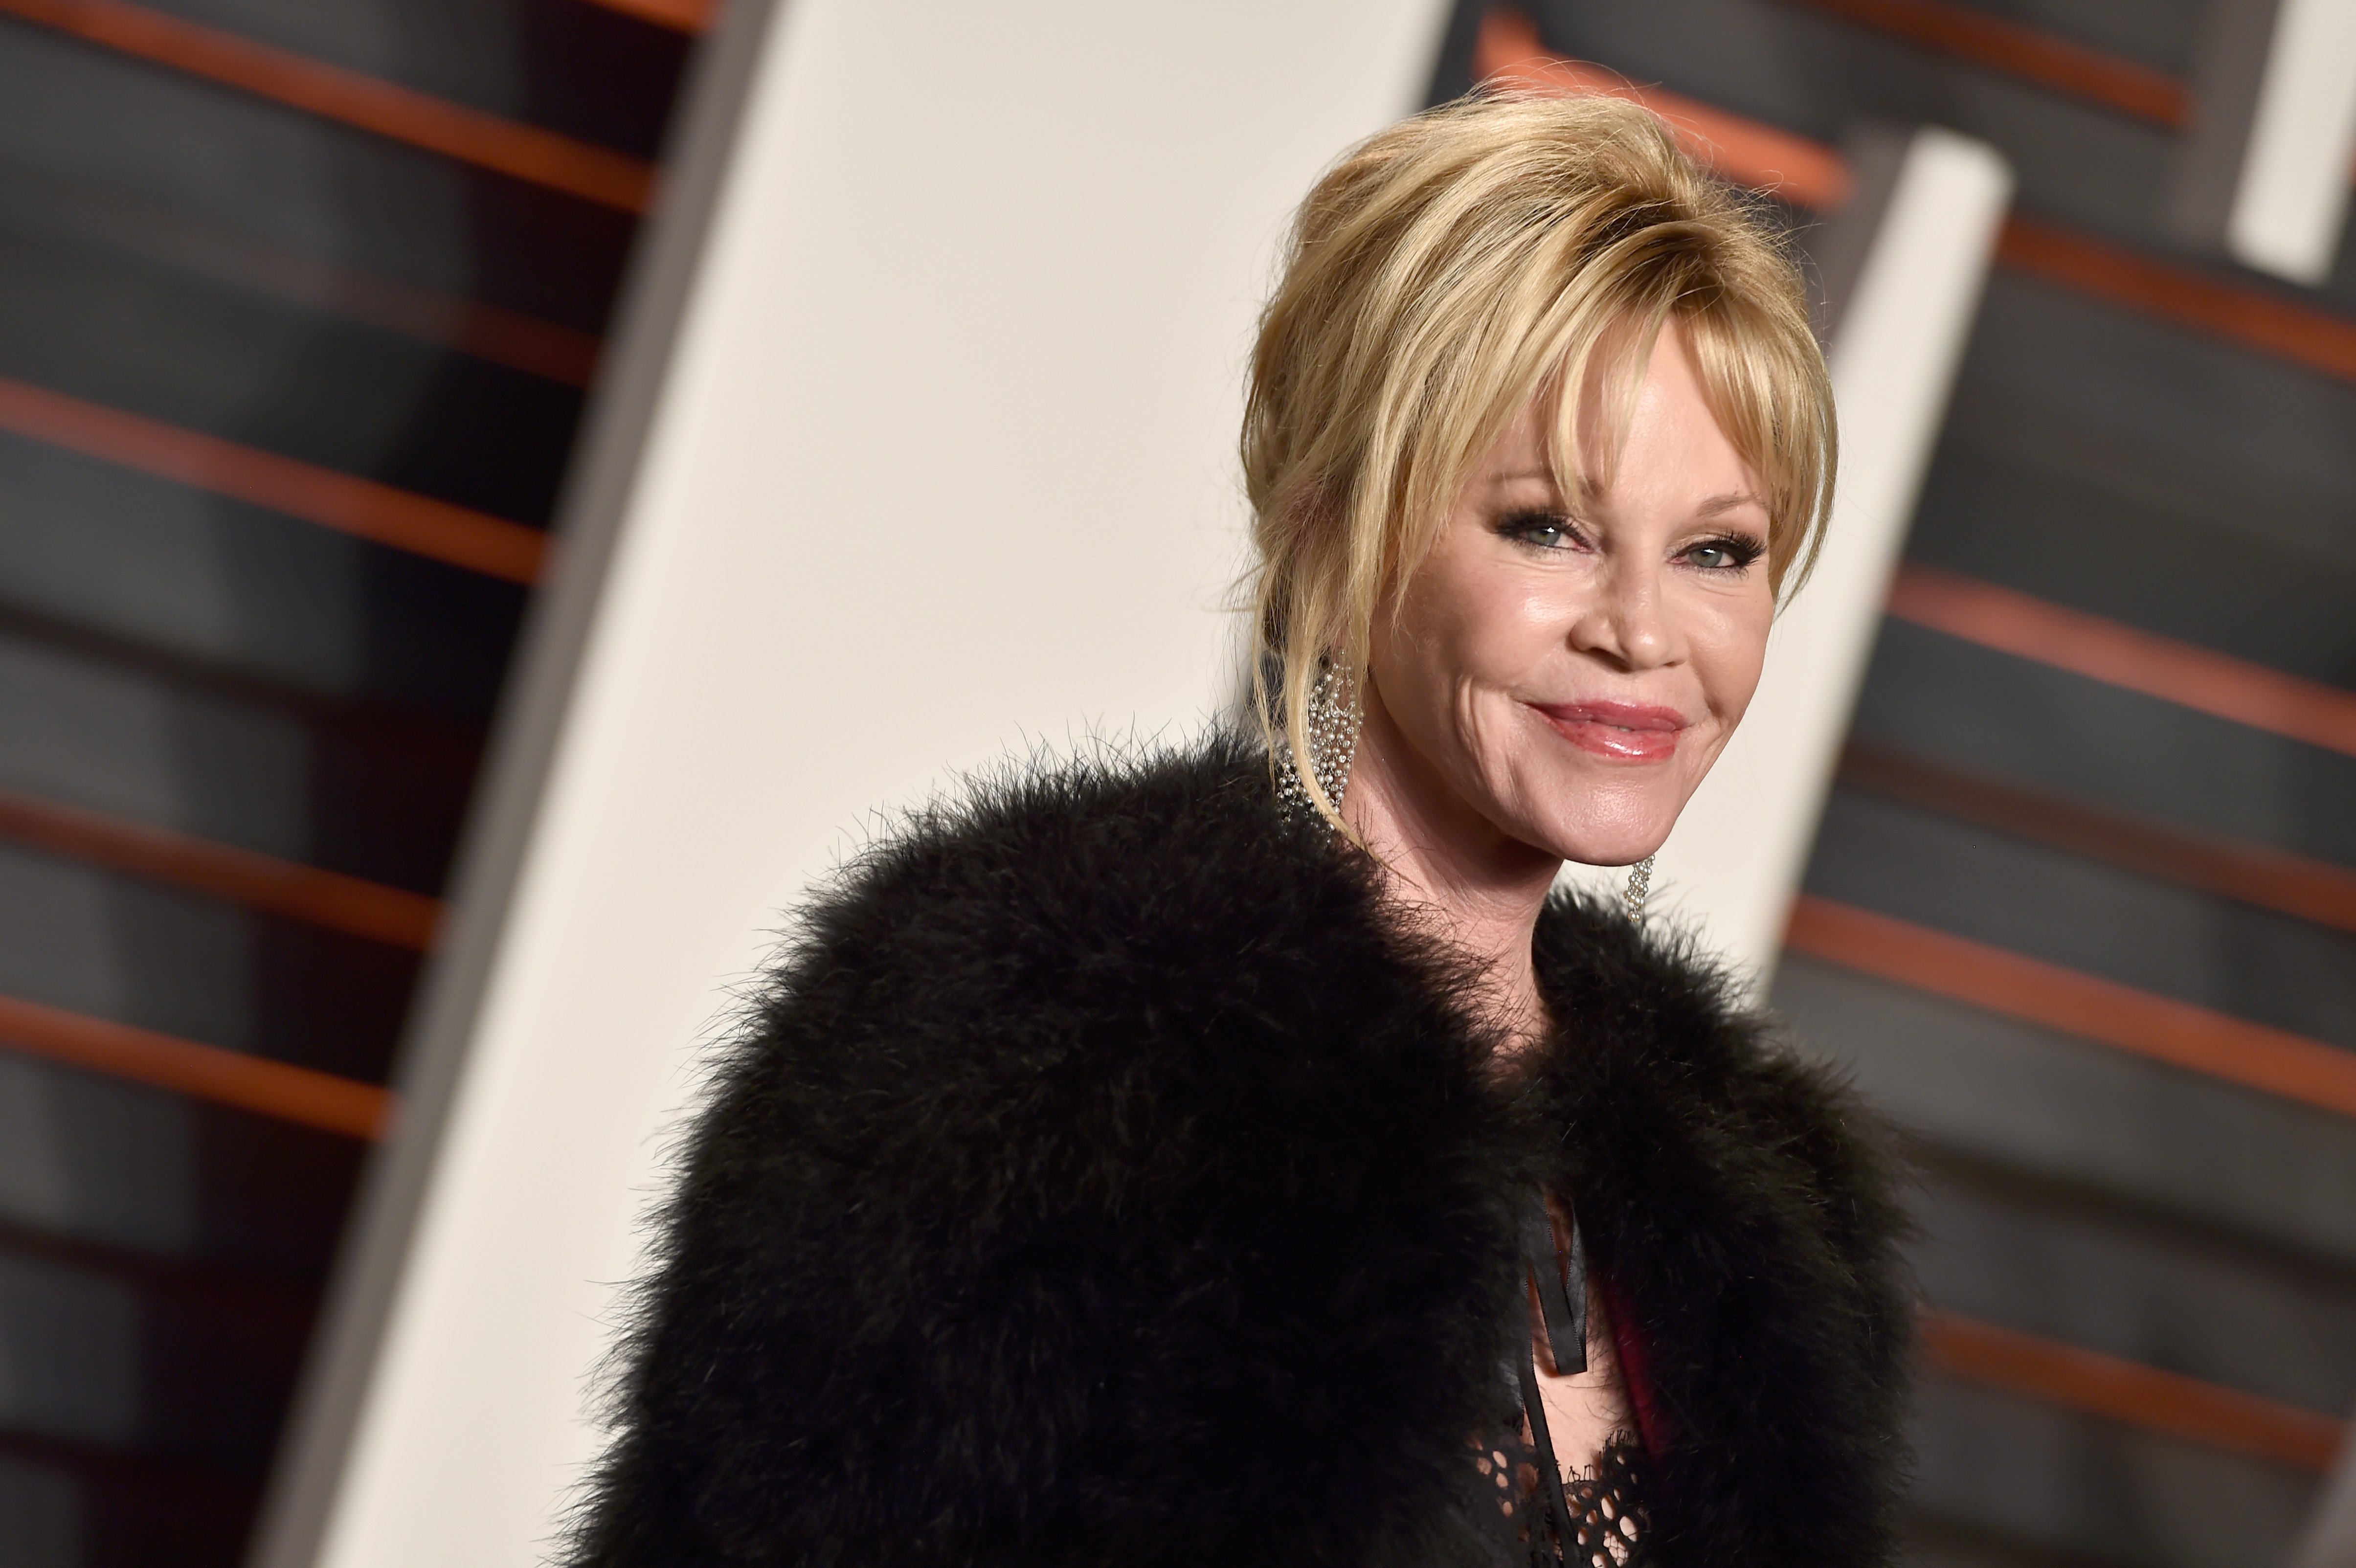 Melanie Griffith at the 2016 Vanity Fair Oscar Party Hosted By Graydon Carter, Beverly Hills, California. | Photo: Getty Images